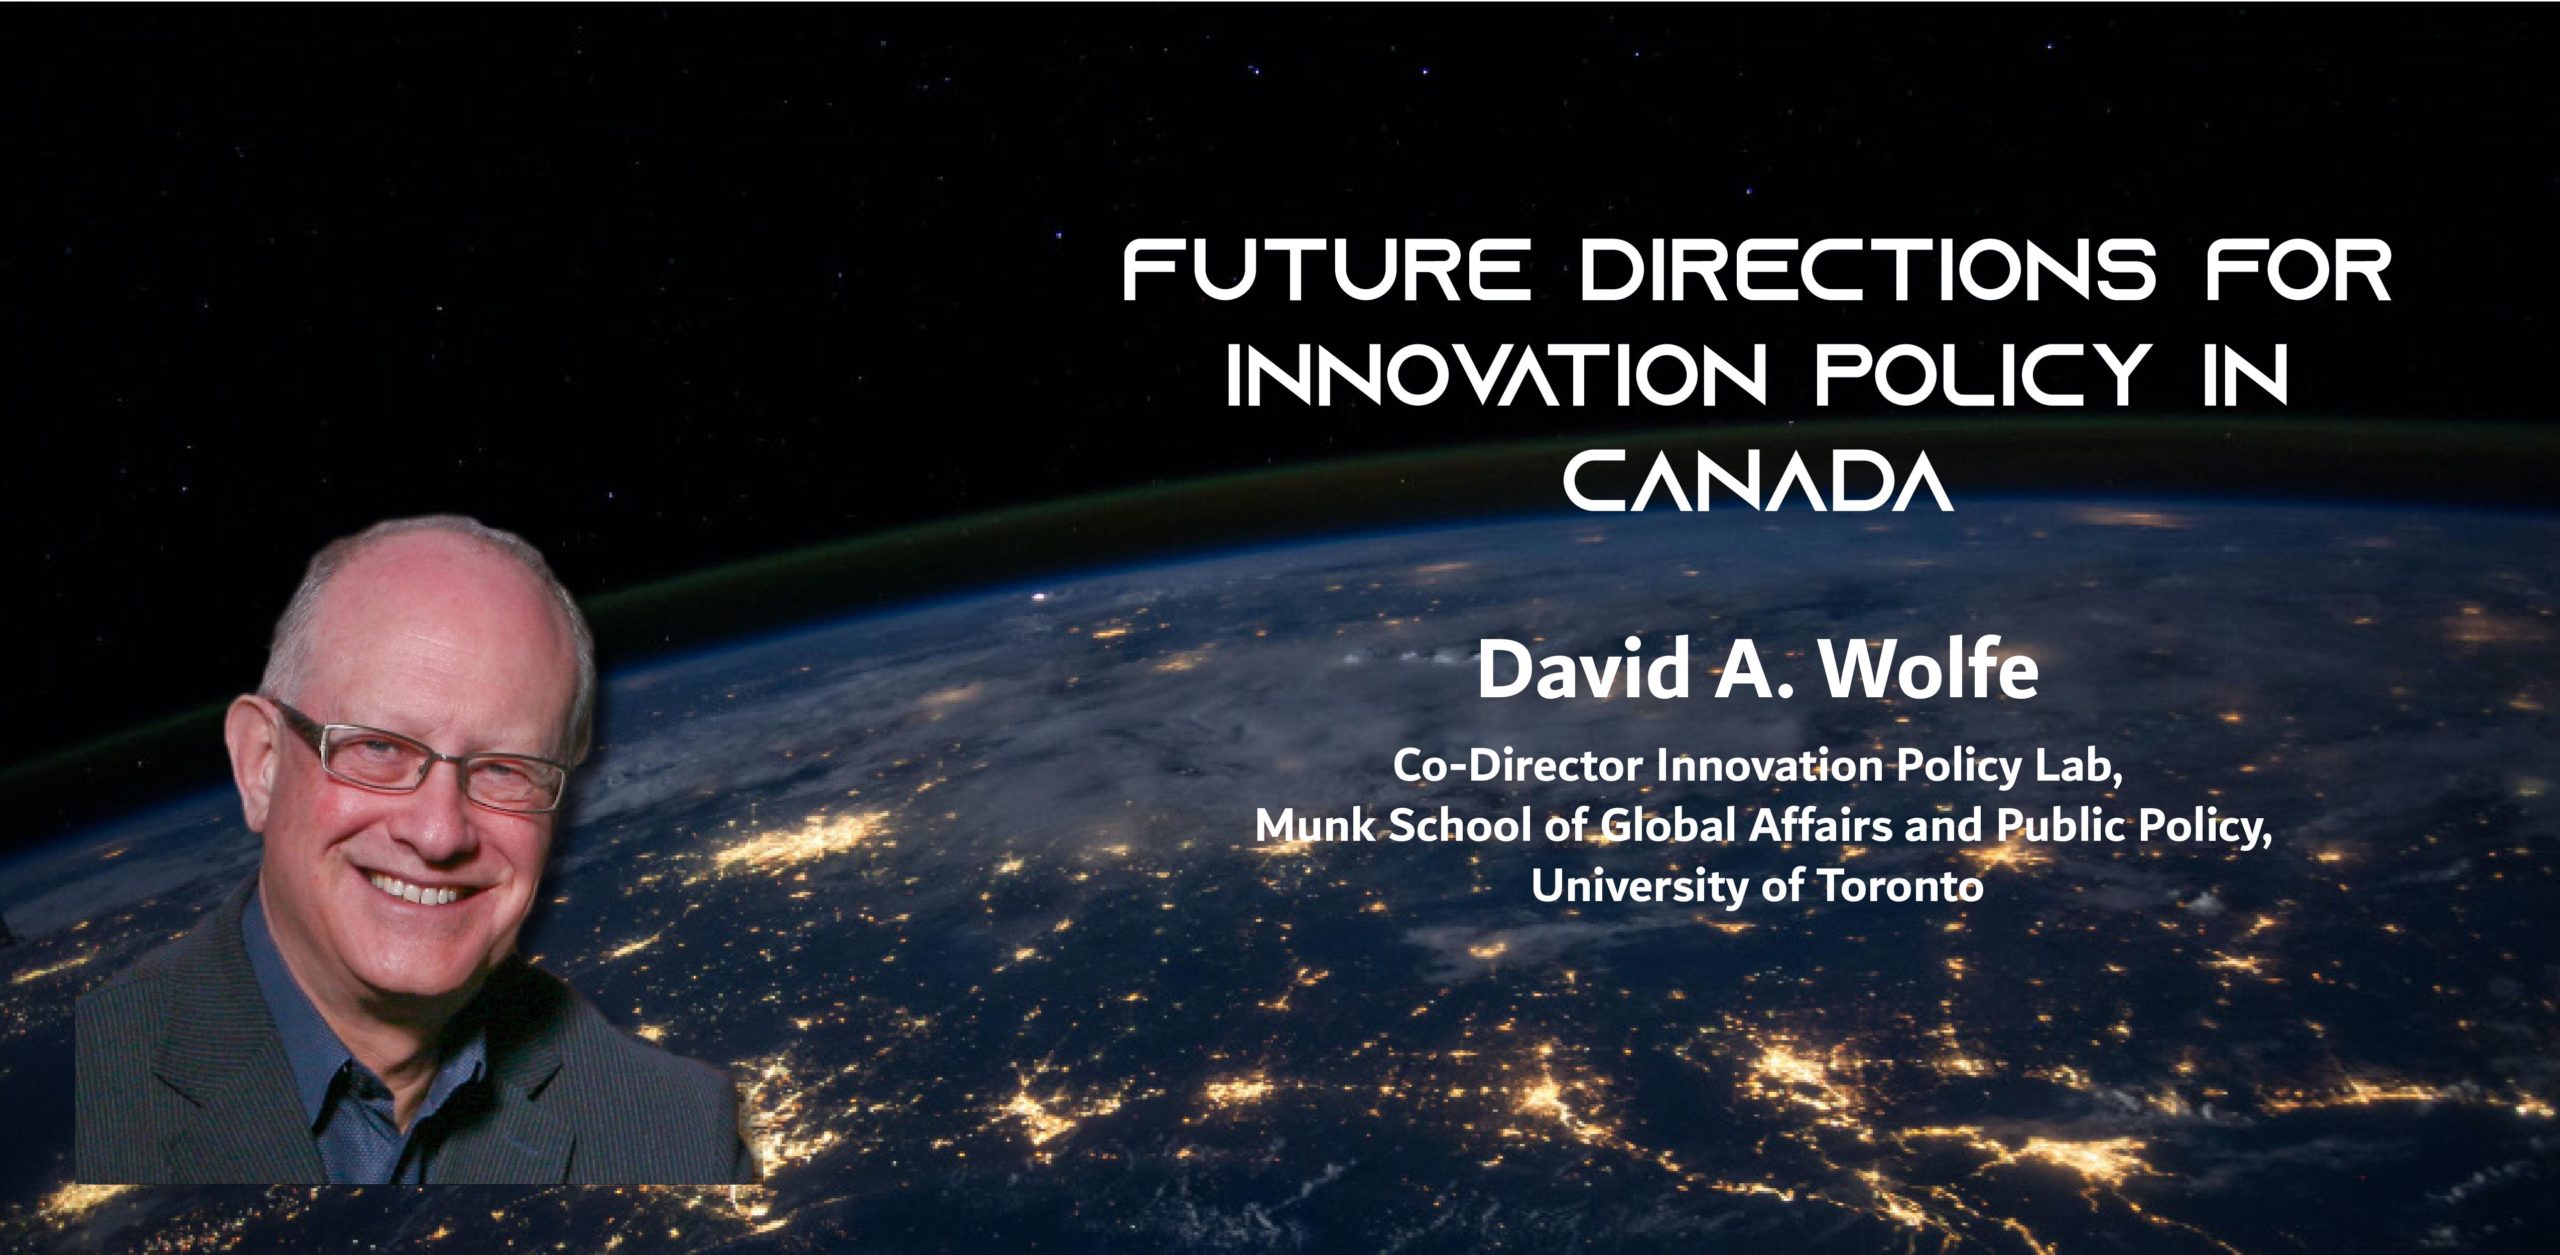 Une photo d'un homme contre le globe la nuit, avec le texte : Future Directions for Innovation Policy in Canada David A. Wolfe Co-Director Innovation Policy Lab, Munk School of Global Affairs and Public Policy, University of Toronto